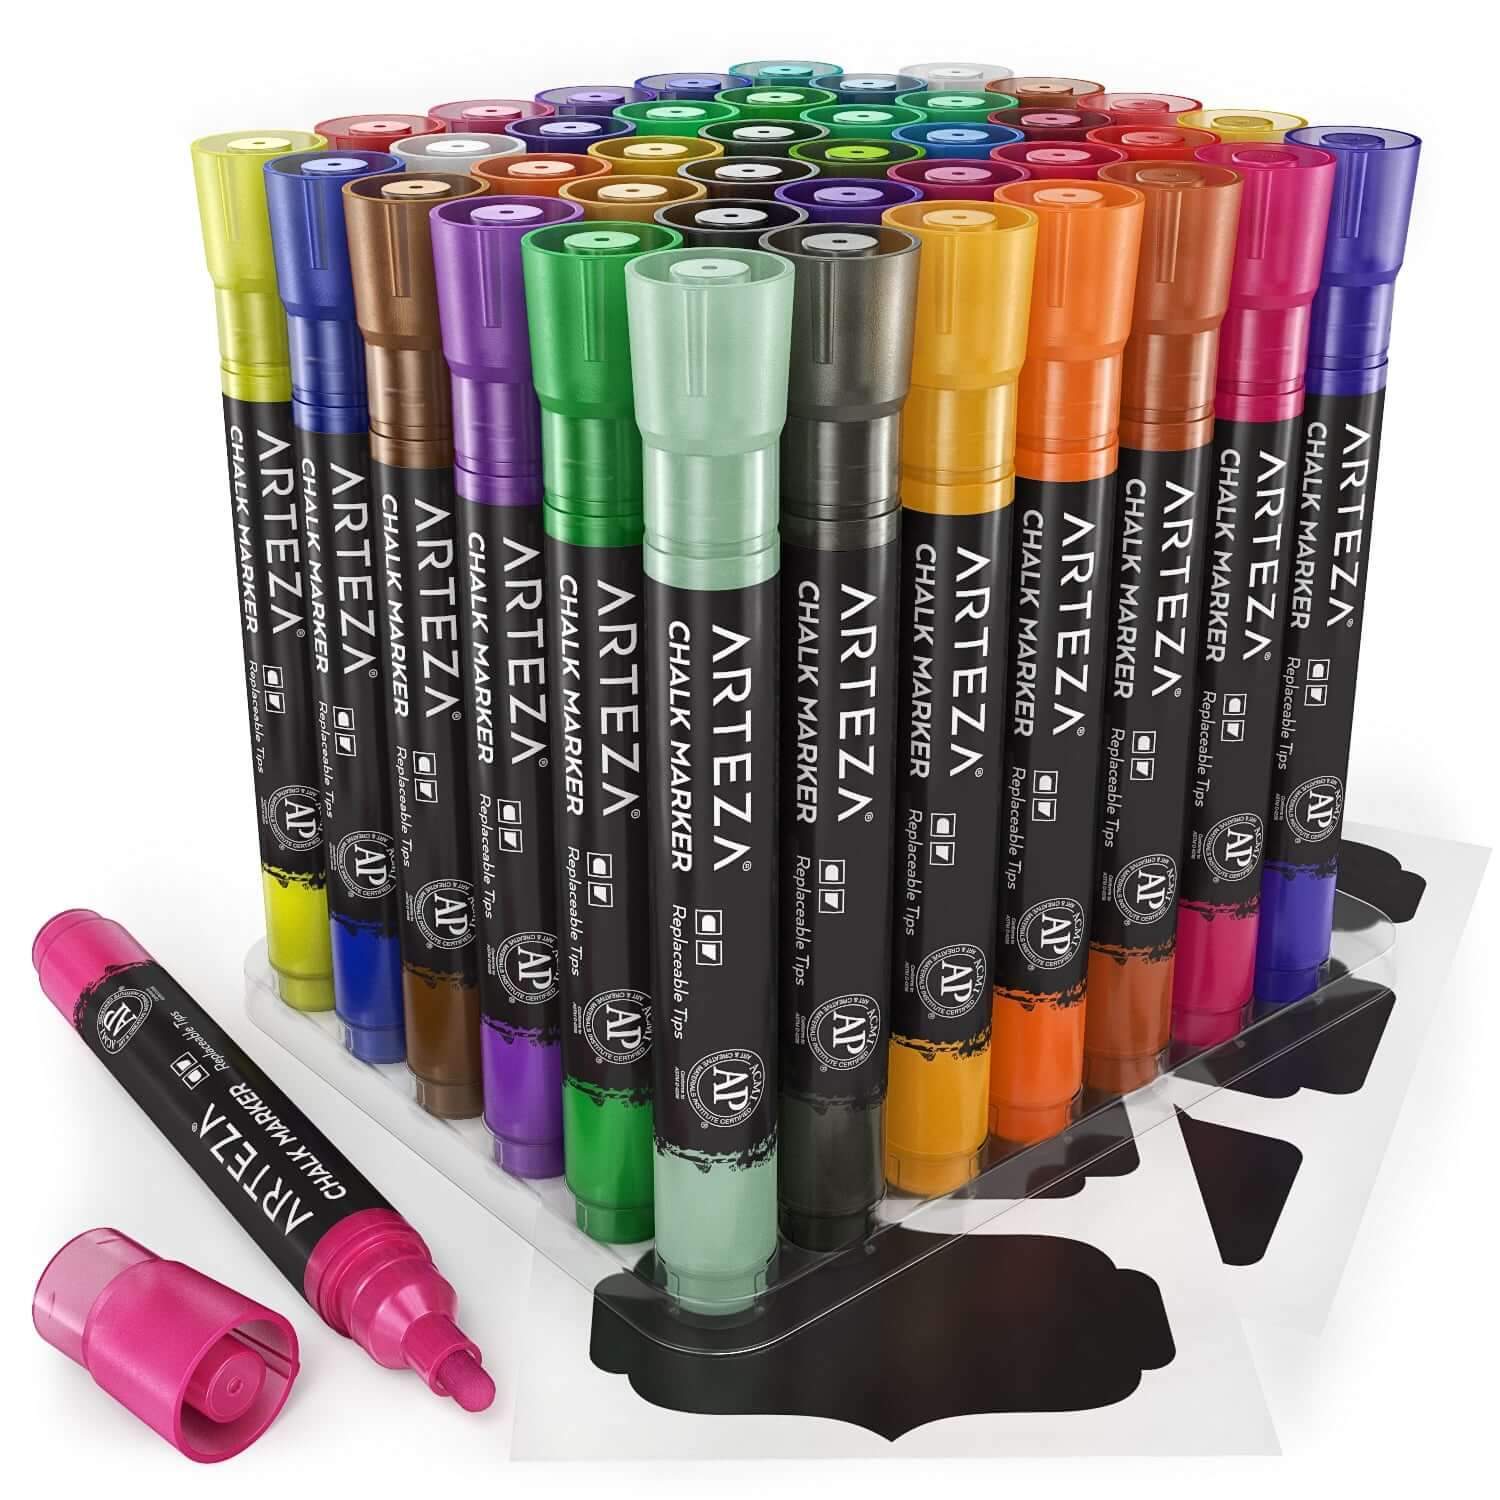 All You Need To Know About Liquid Chalk Markers